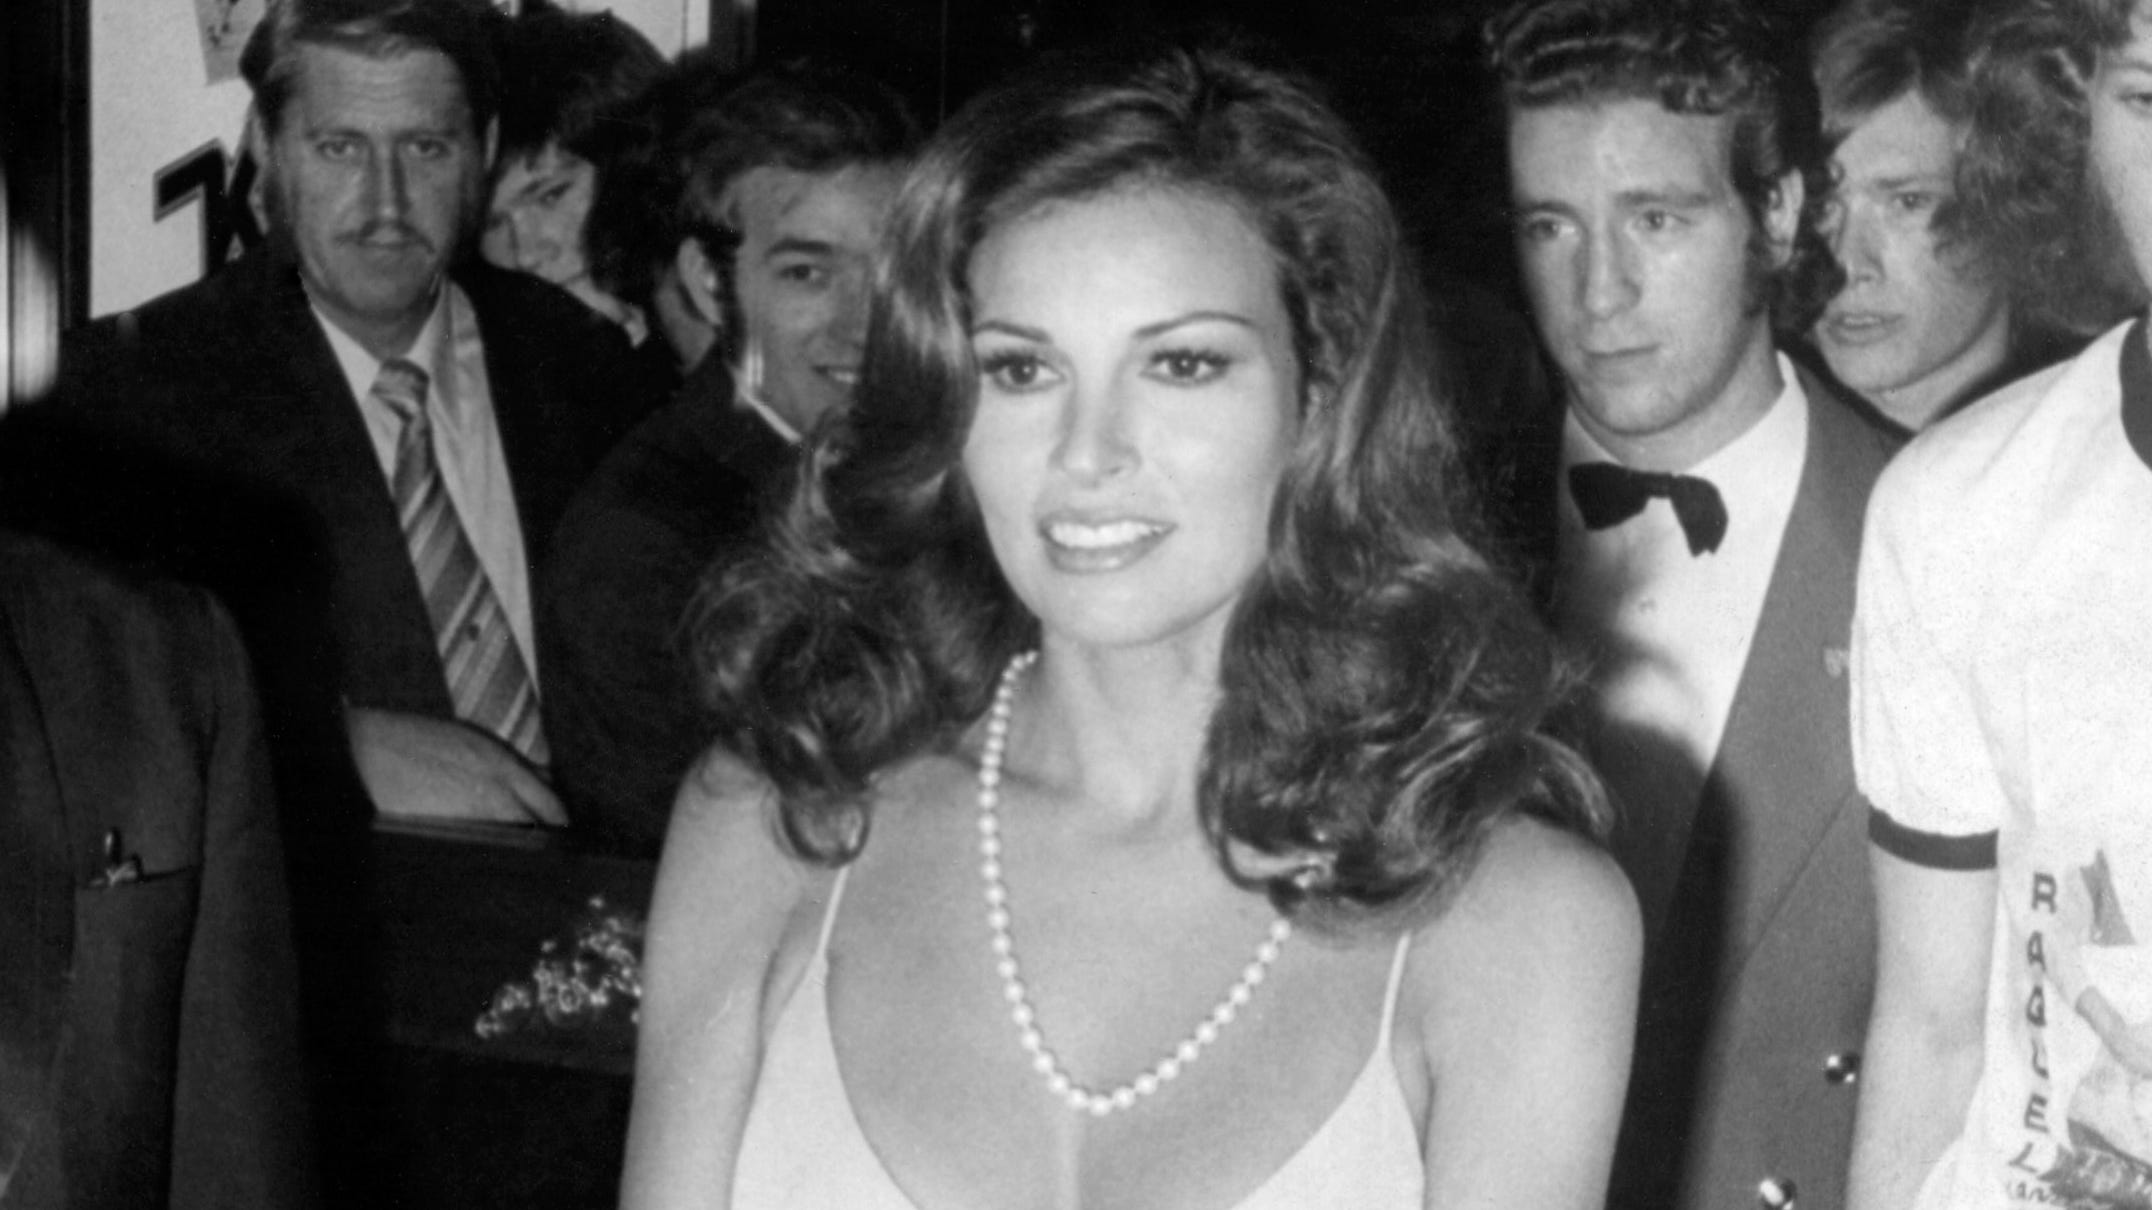 Reese Witherspoon, Chris Meloni, more stars react to Raquel Welch's death: 'We've lost a true icon'